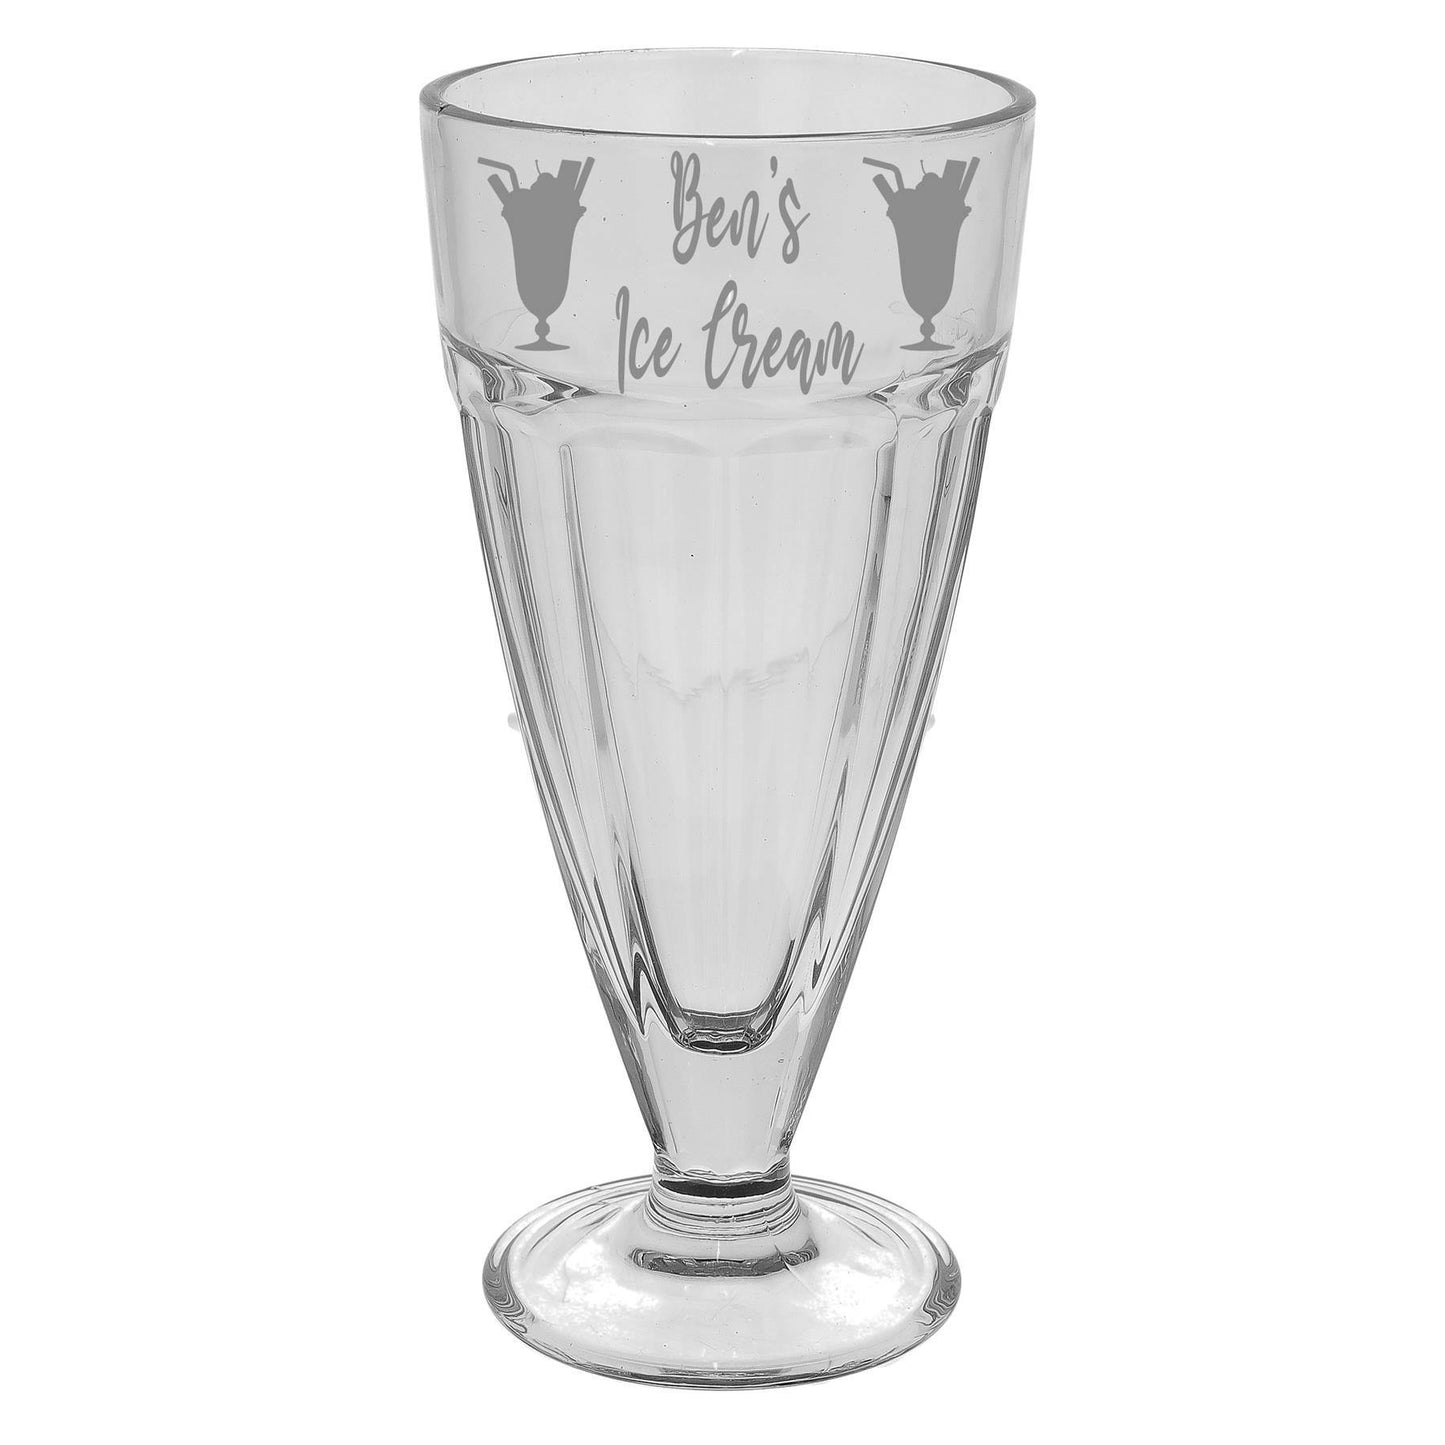 Engraved Personalised Ice Cream Sundae Glass Filled with Goodies Gift  - Always Looking Good -   